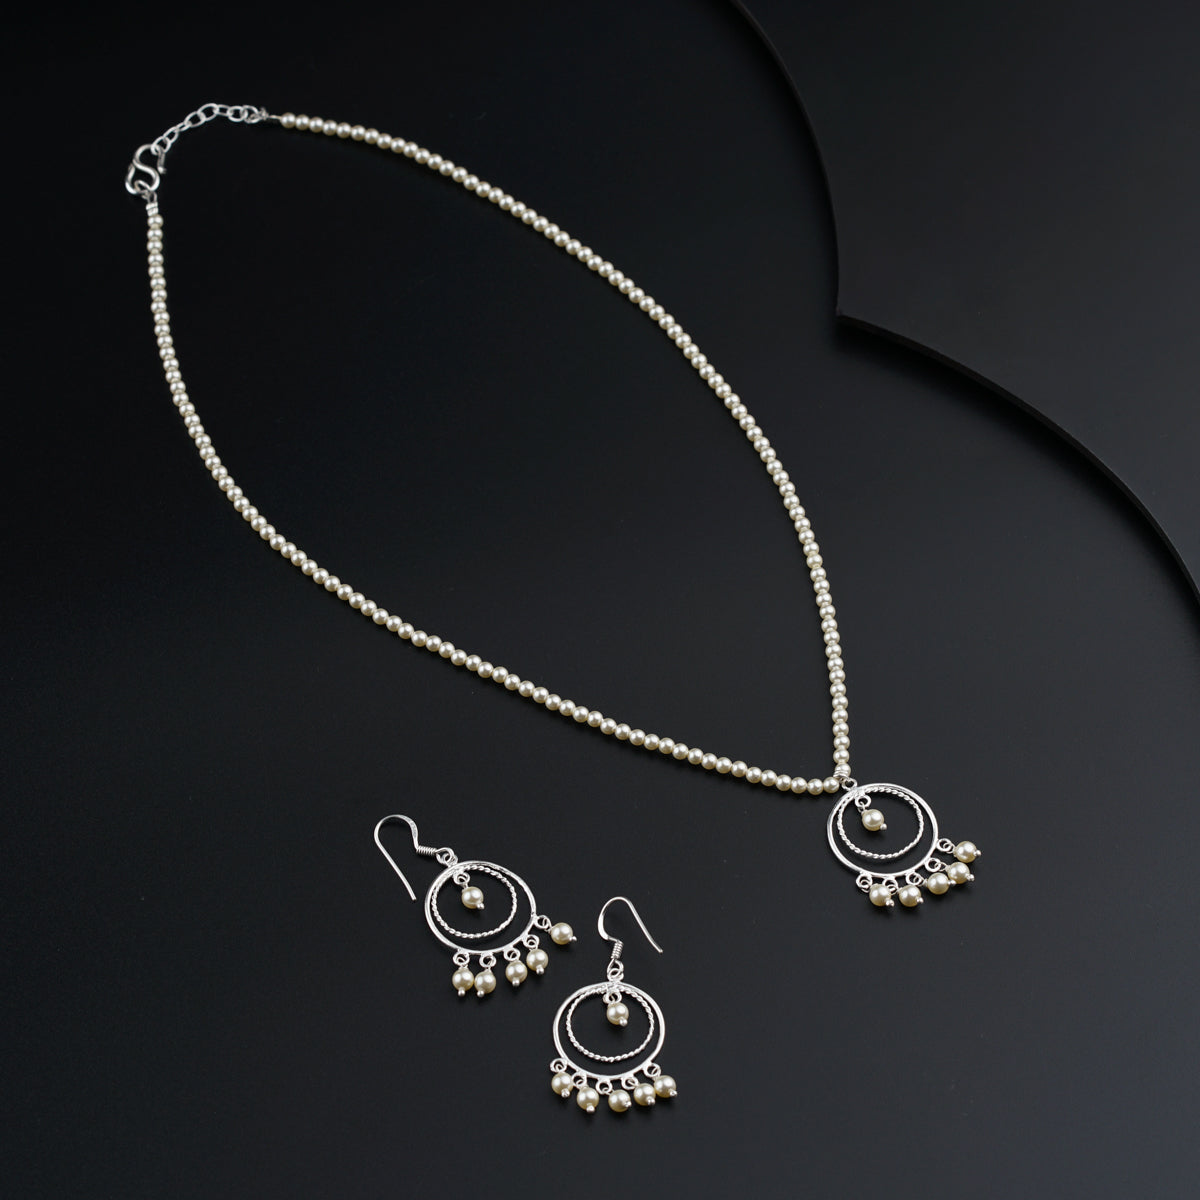 Handmade Silver Set with Pearls